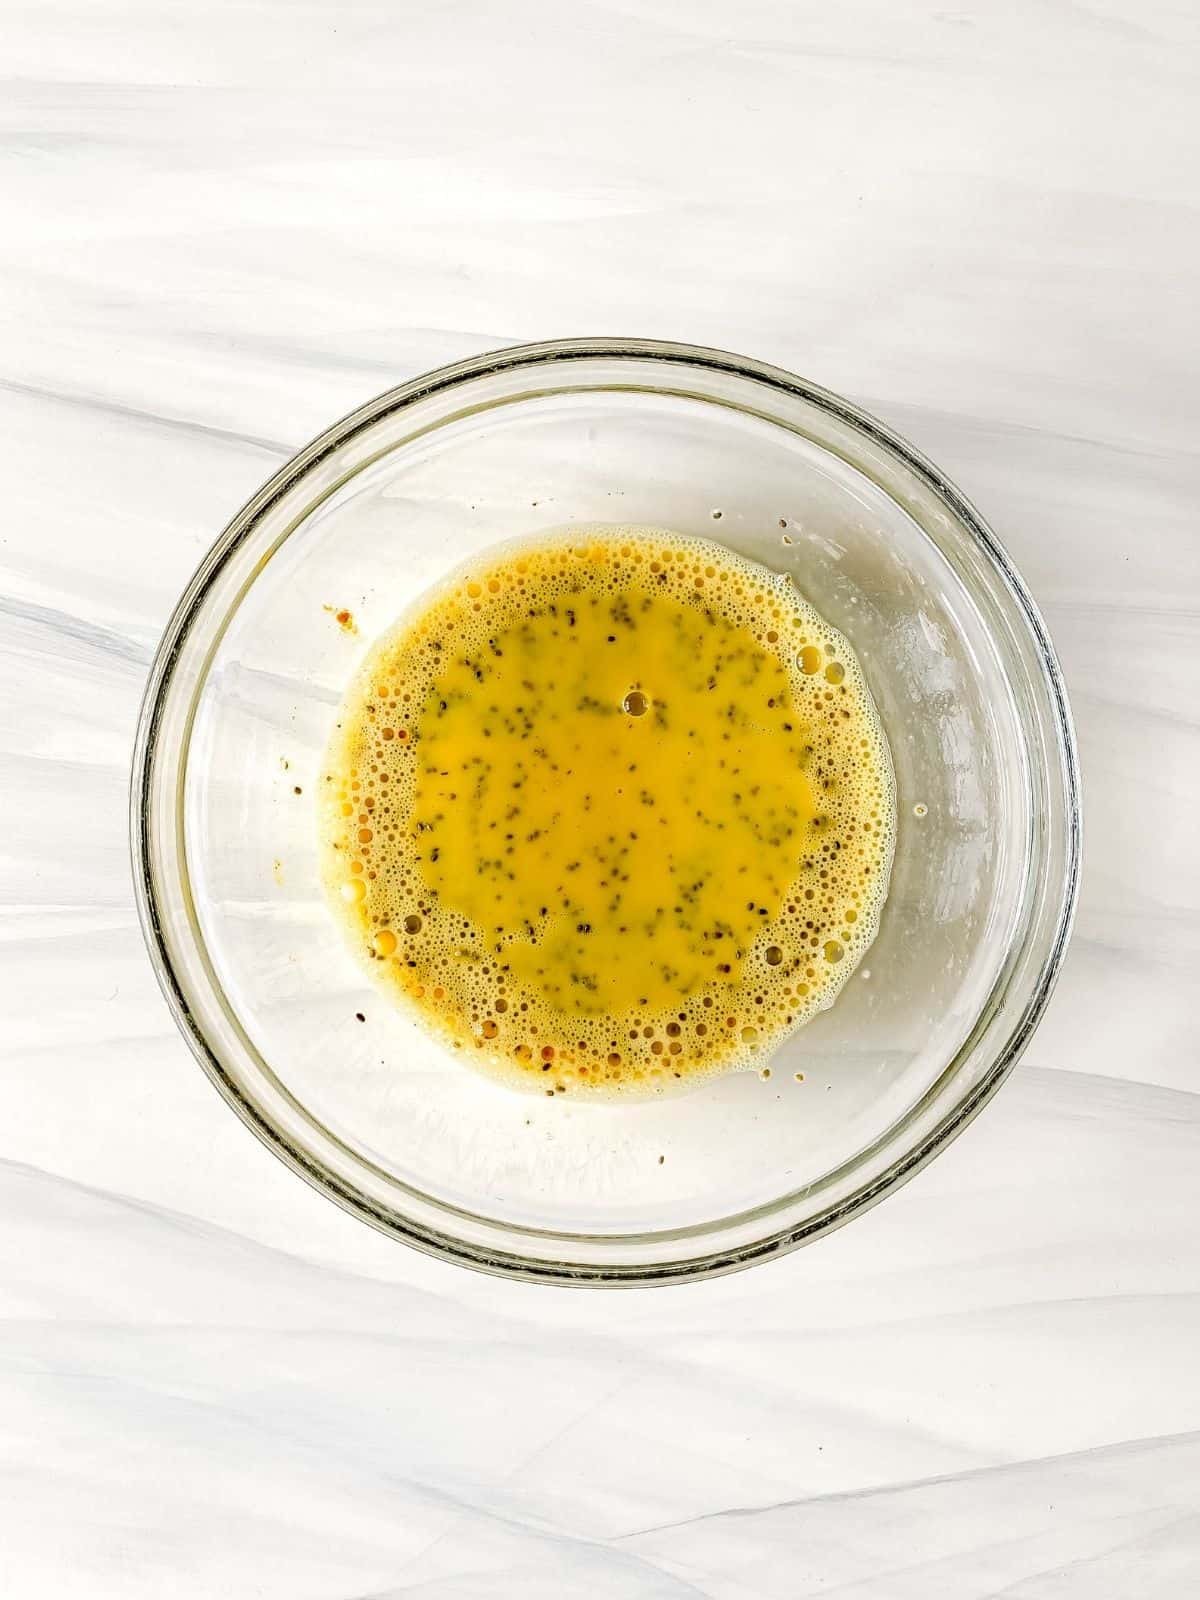 chia seeds whisked into milk with turmeric powder in a glass bowl.